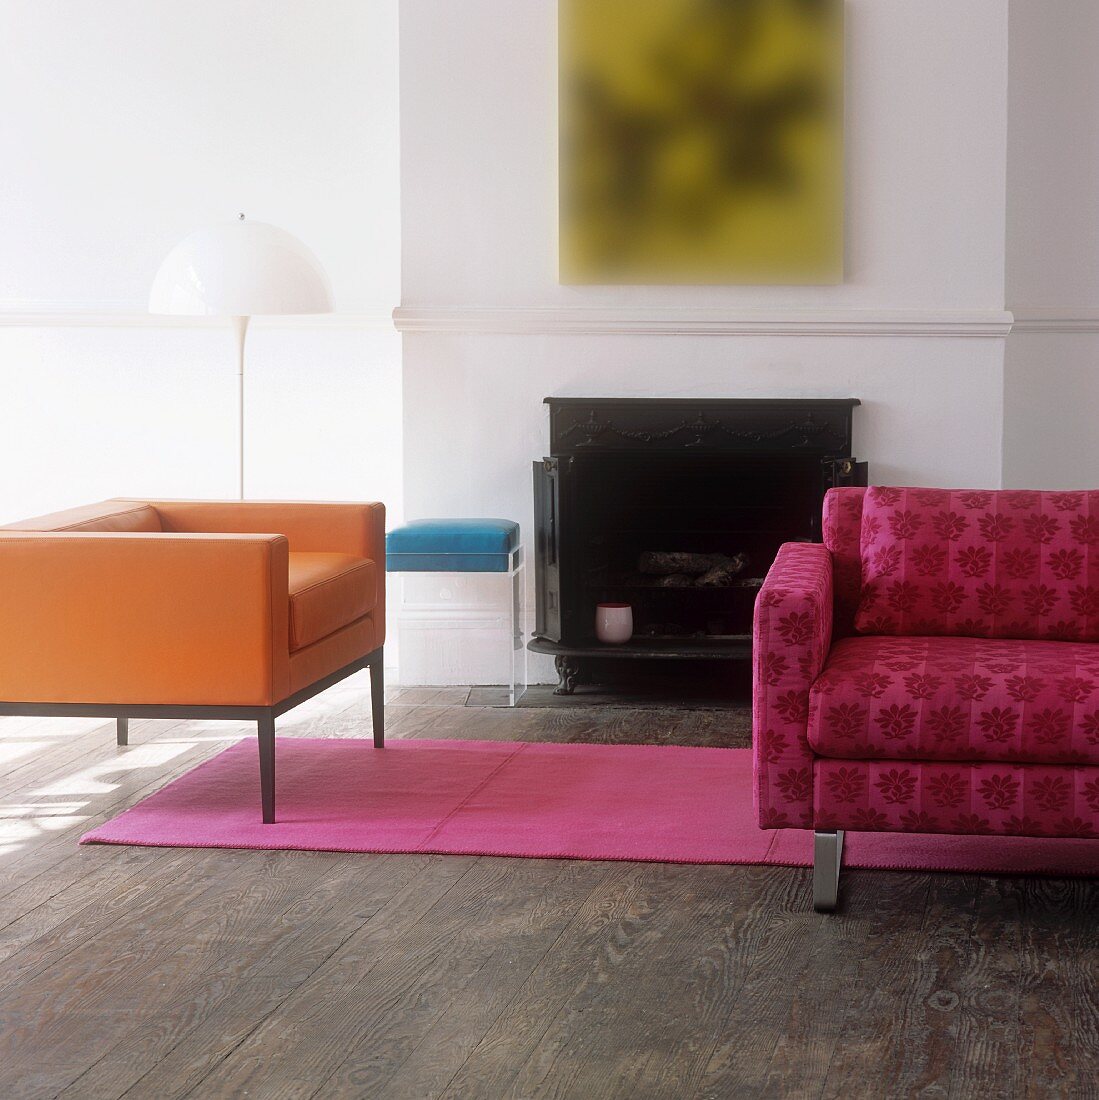 An orange cubic armchair and a pink patterned sofa in front of a fireplace in a traditional atmosphere